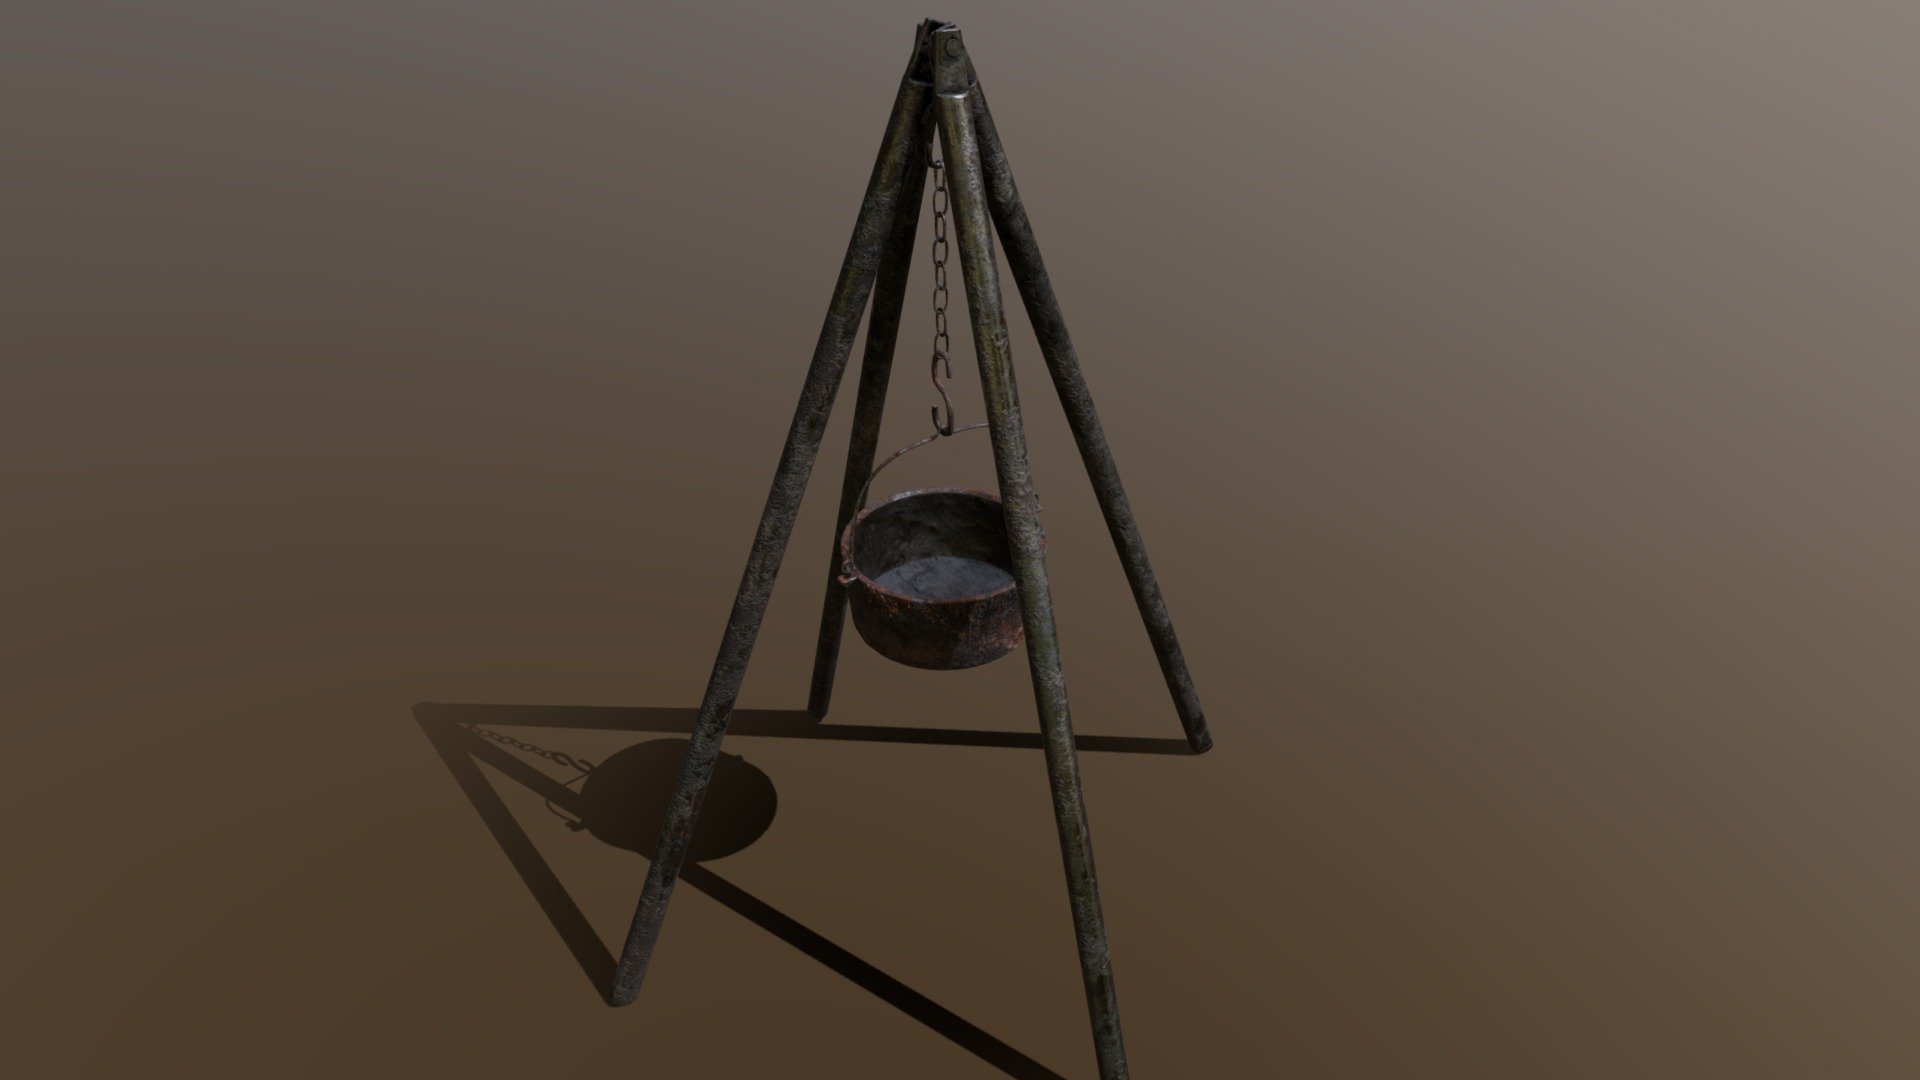 Old Medieval Iron Cooking Tripod with a Cooking Pot 3D Model. This model contains: The cooking tripod - Chains - Hook - Cooking Pot

All modeled in Maya, textured with Substance Painter.

The model was built to scale and is UV unwrapped properly. Contains only one 4K texture set.

⦁ 6918 tris.

⦁ Contains: .FBX .OBJ and .DAE

⦁ Model has clean topology. No Ngons.

⦁ Built to scale

⦁ Unwrapped UV Map

⦁ 4K Texture set

⦁ High quality details

⦁ Based on real life references

⦁ Renders done in Marmoset Toolbag

Polycount:

verts 3533

edges 7101

faces 3582

tris 6918

If you have any questions please feel free to ask me 3d model